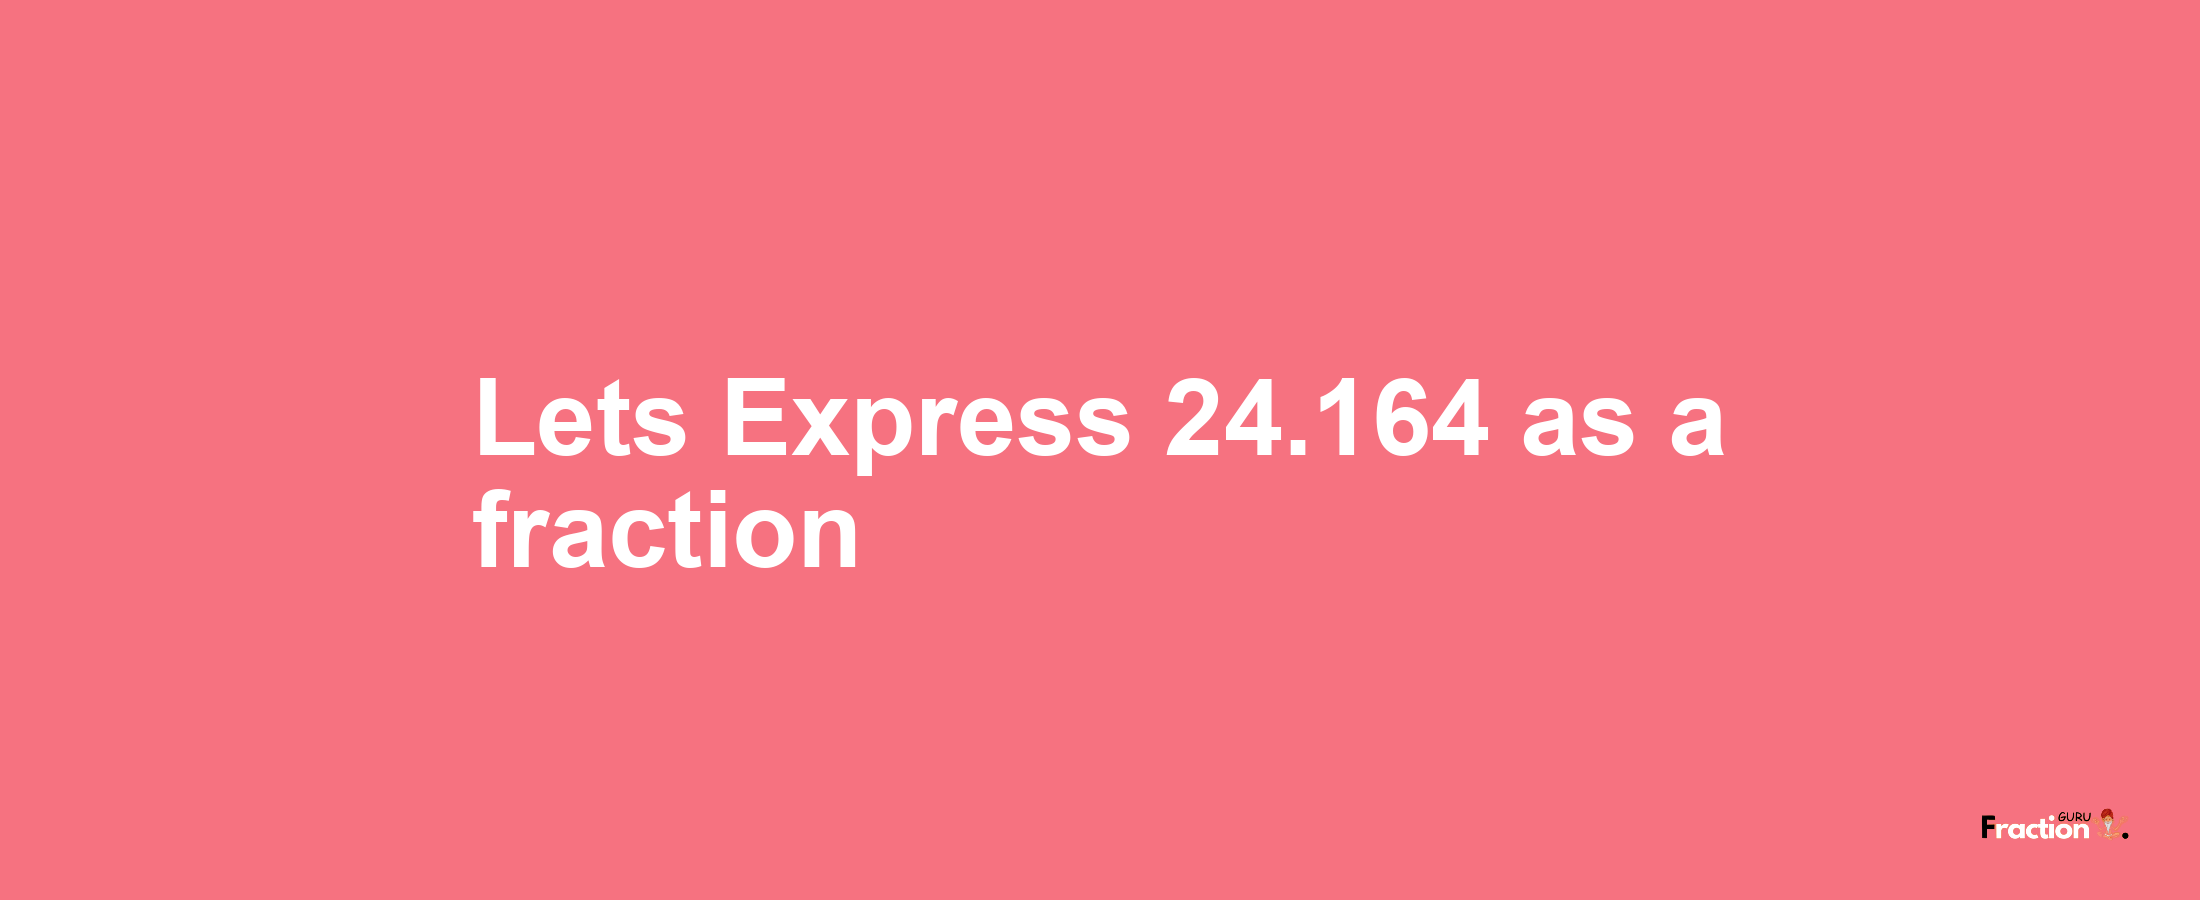 Lets Express 24.164 as afraction